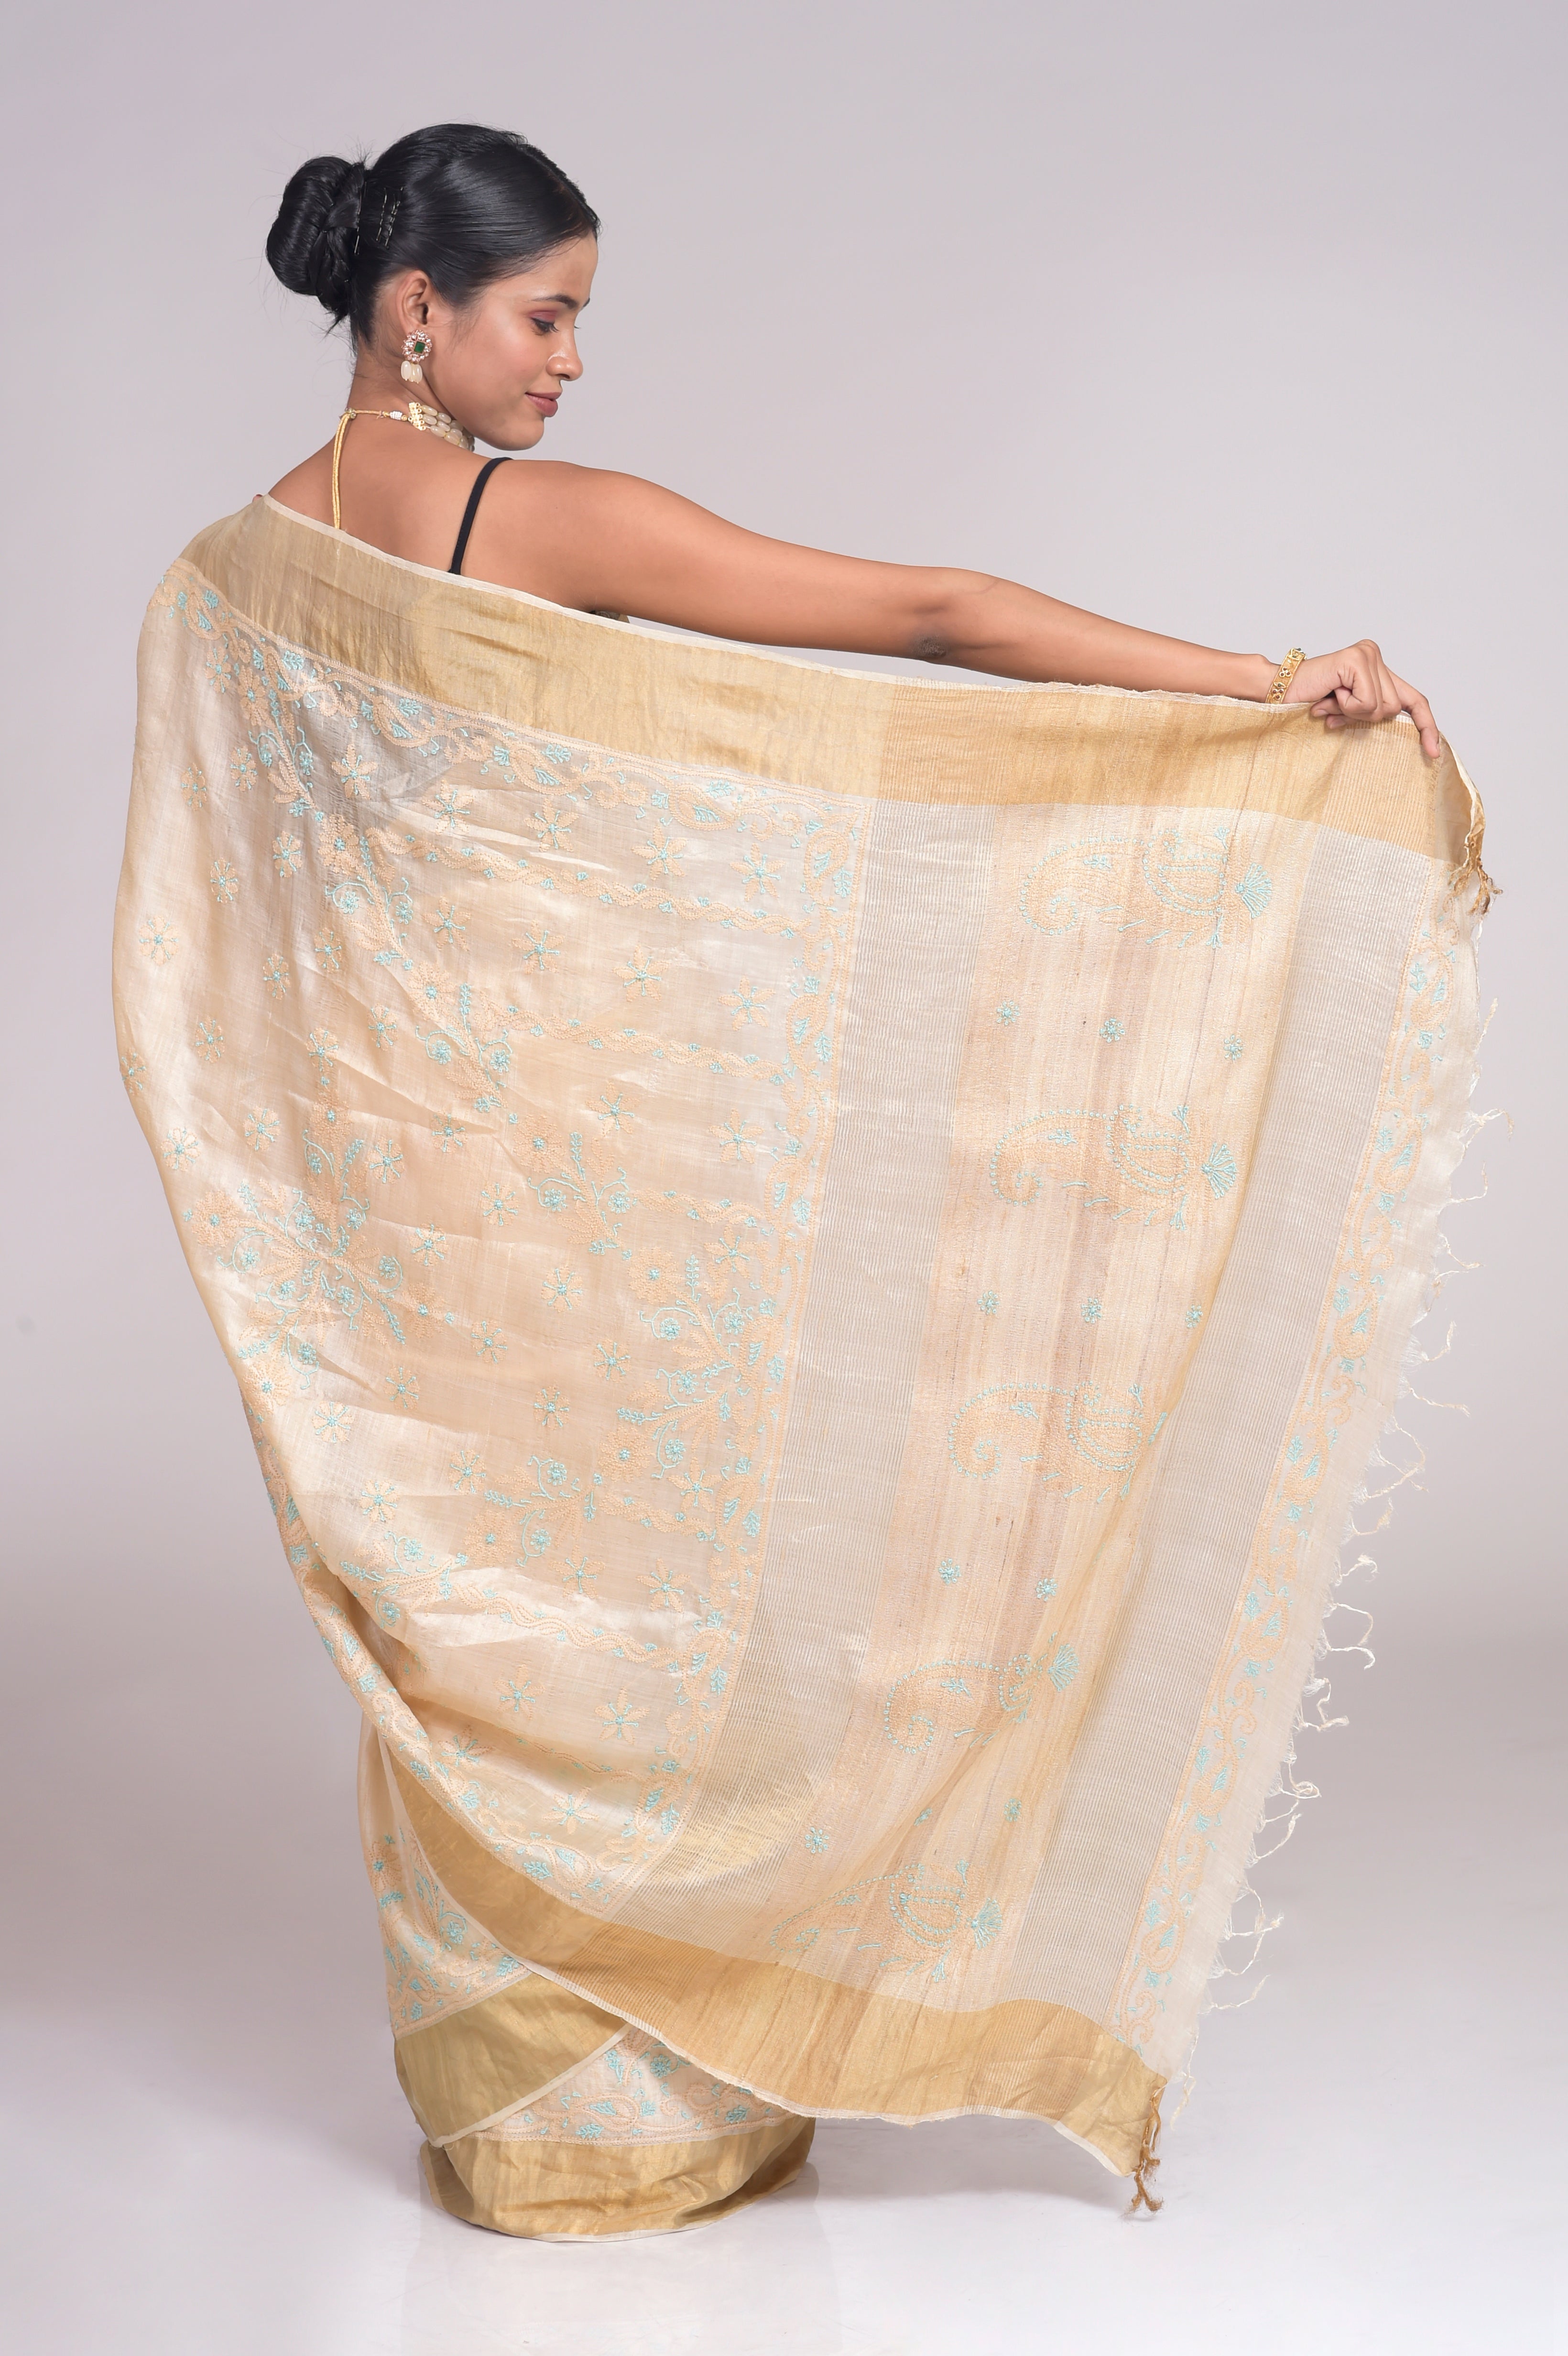 Tussar Silk Saree Beige Colour With Same Colour Blouse piece included Lucknow Chikan Emporium .